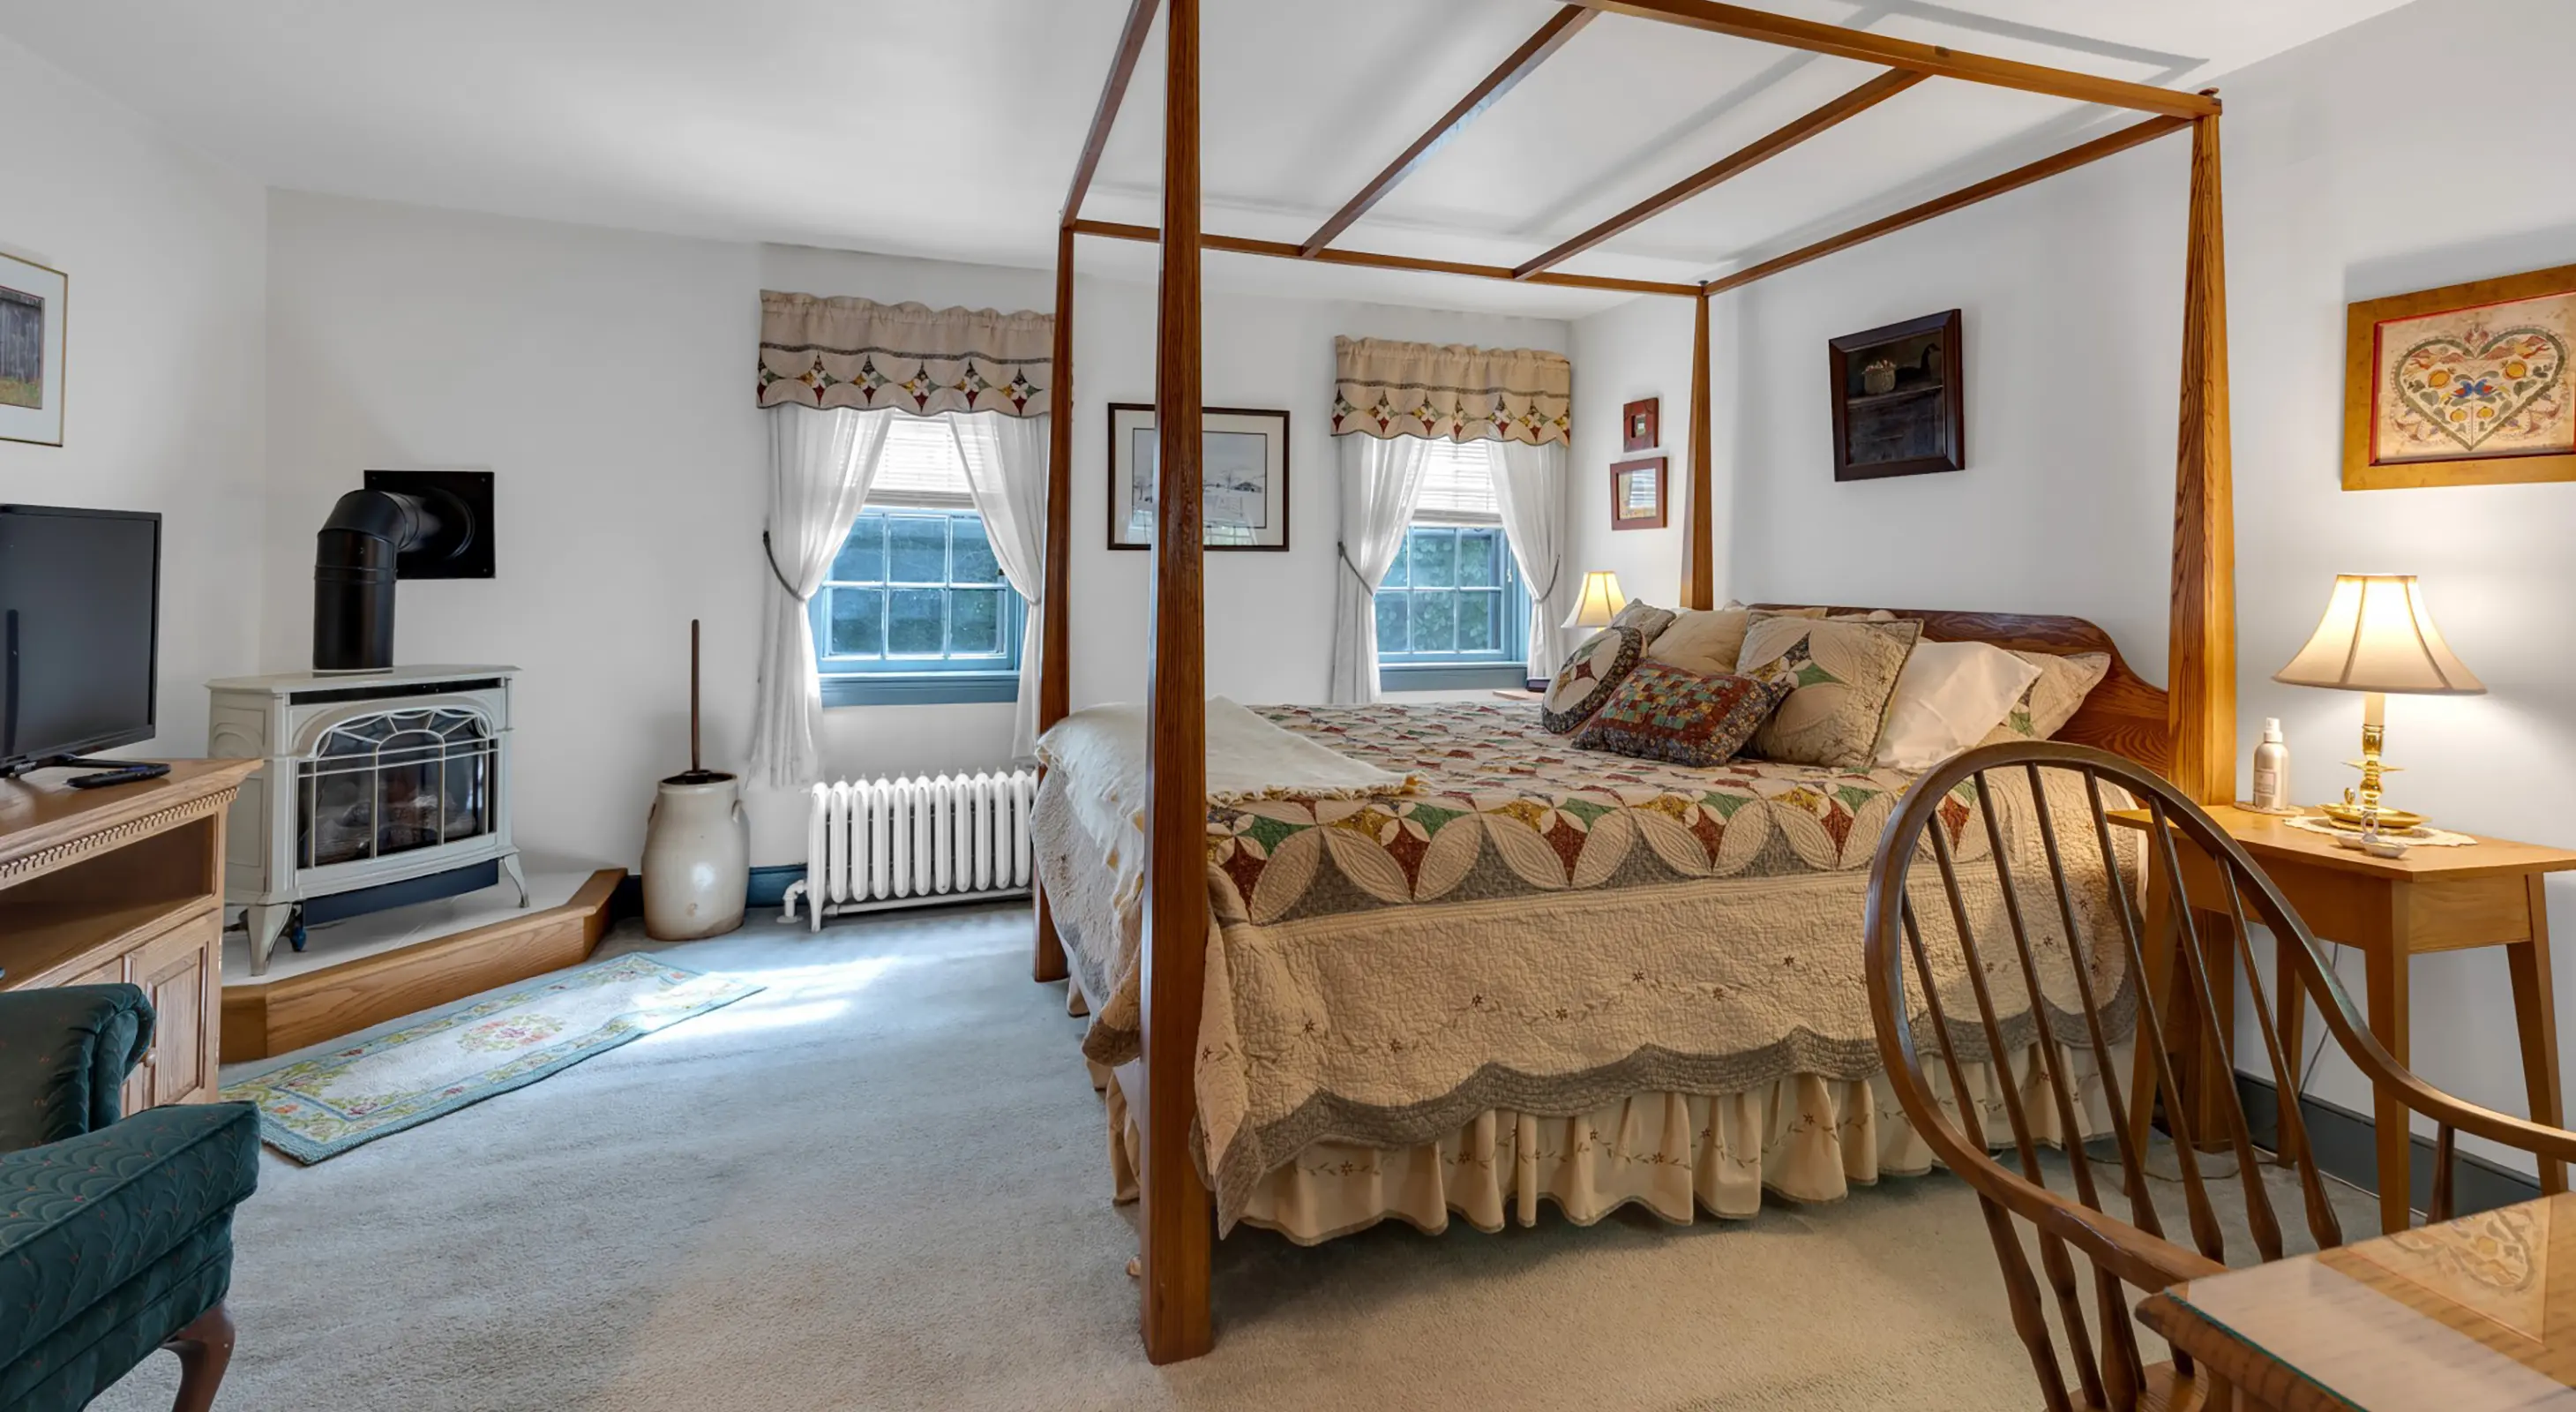 Churchtown room bed and fireplace offering expectational lodging in Amish Country, PA